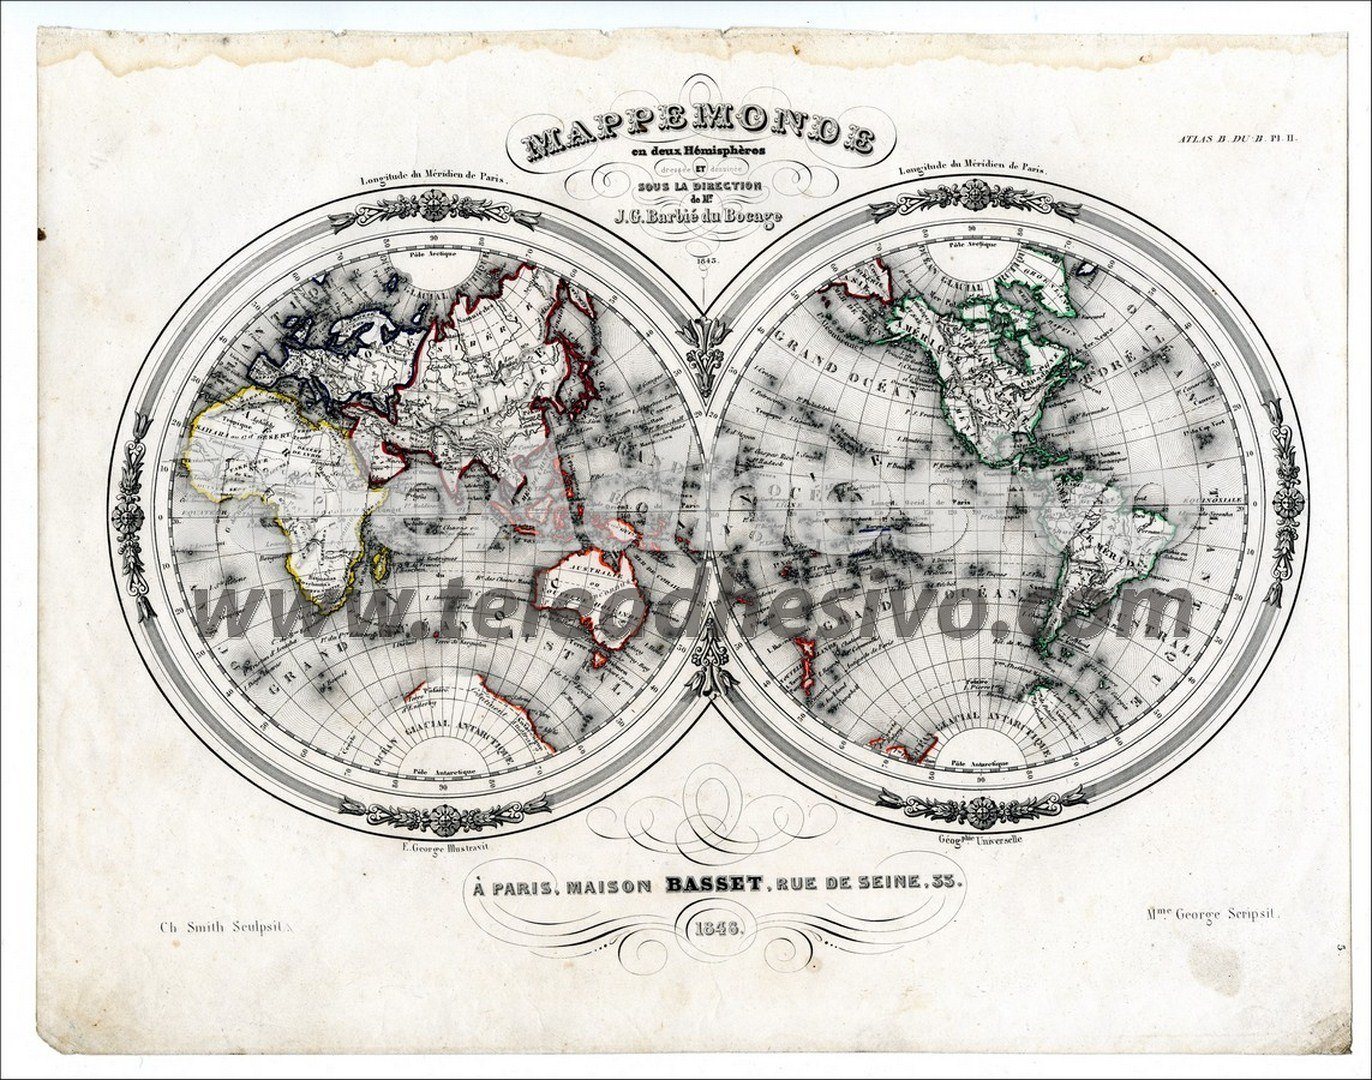 Wall Murals: Map of the World 1848